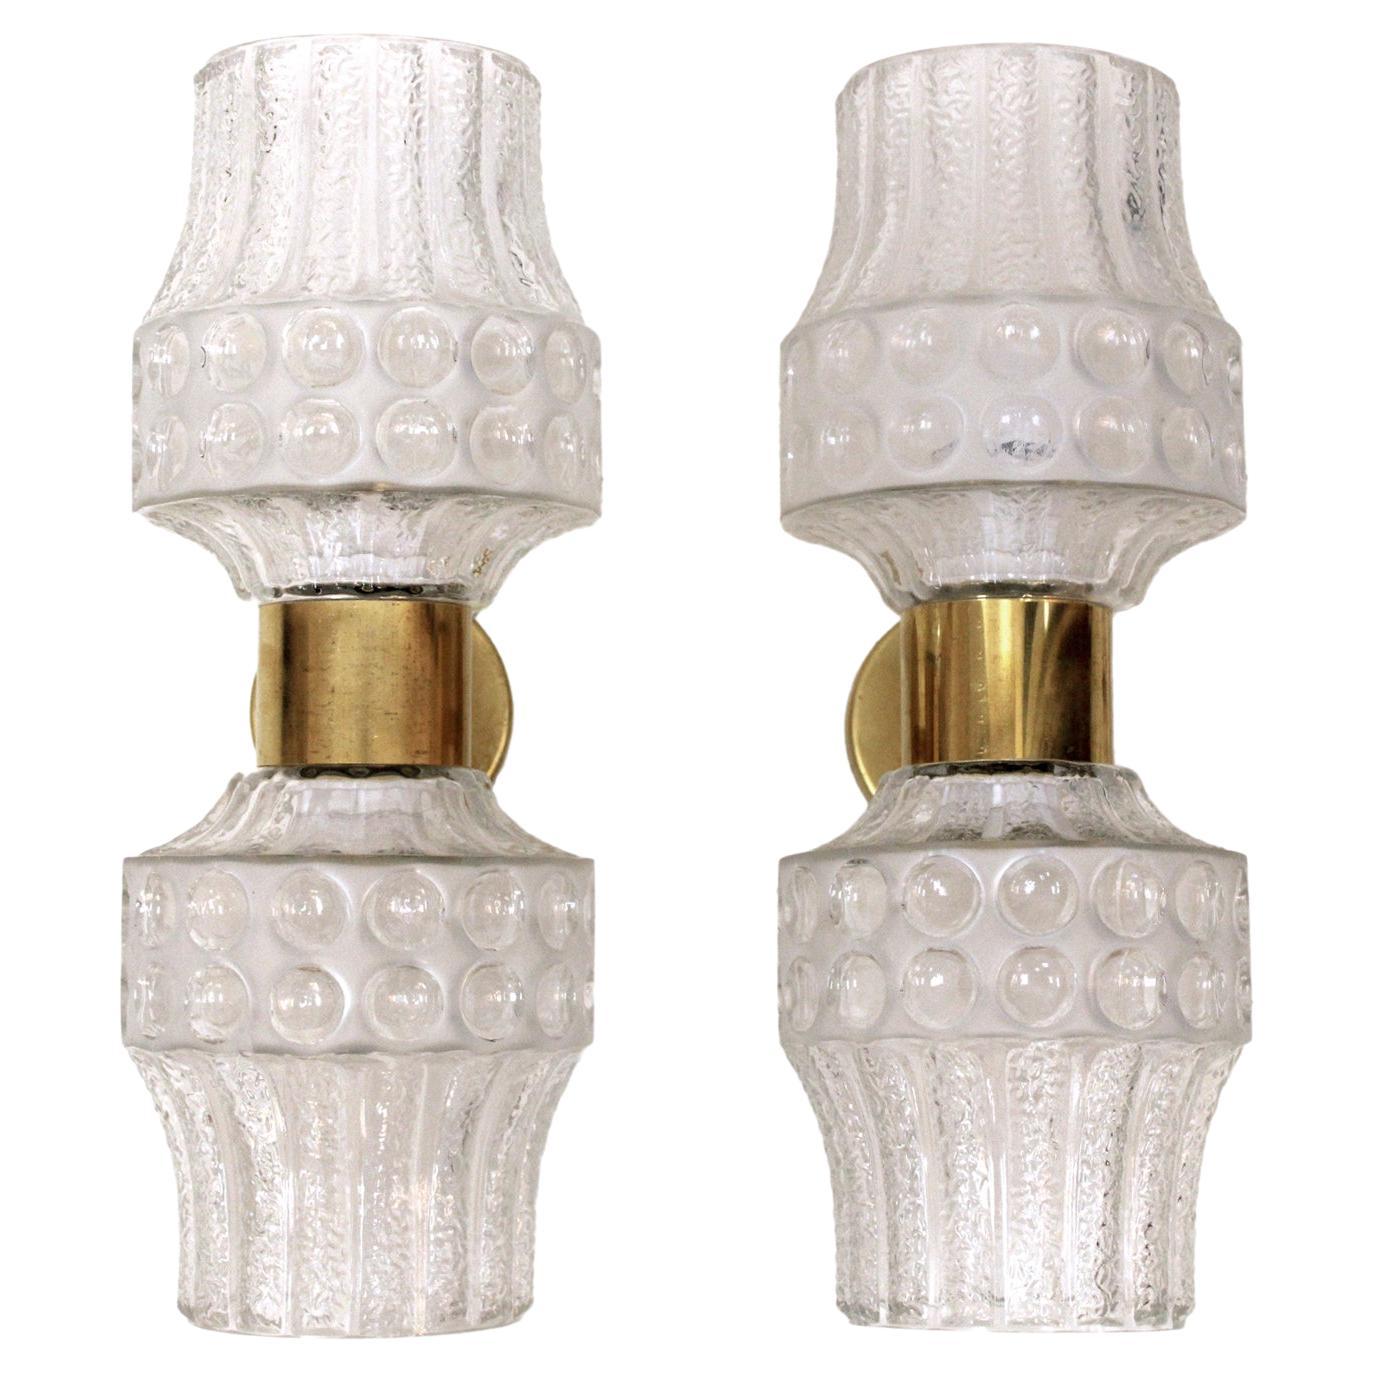 Mid-Century Modern Style Murano Glass and Brass Pair of Italian Sconces